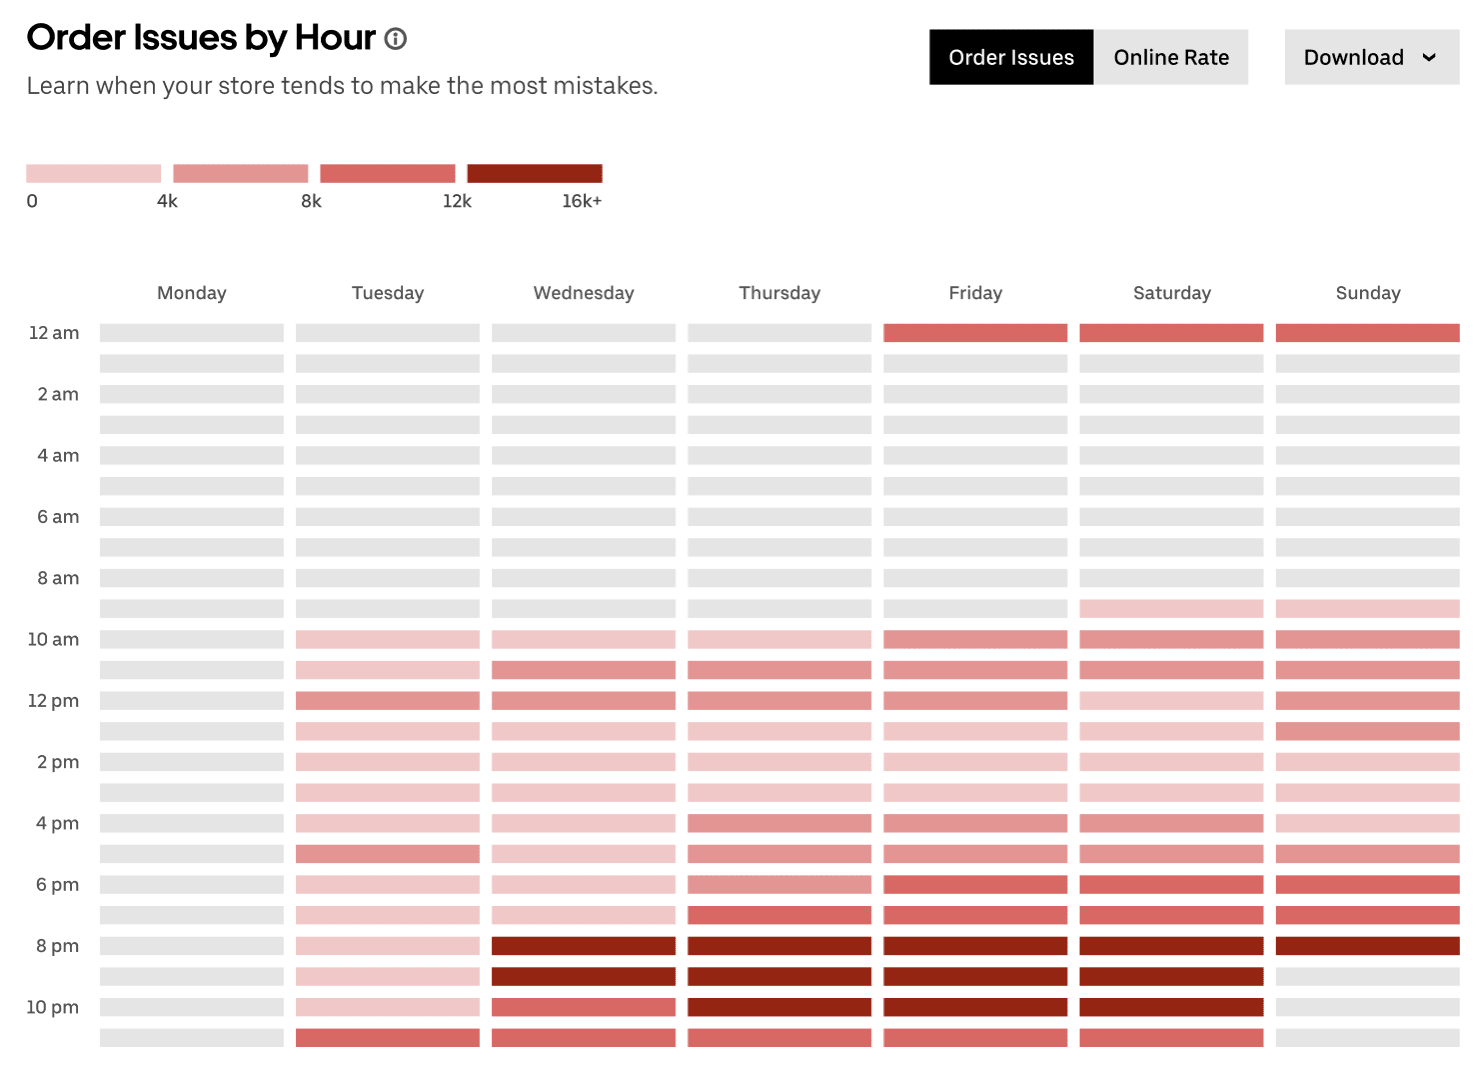 Heat map showing how order issues change during different days of the week and times of day